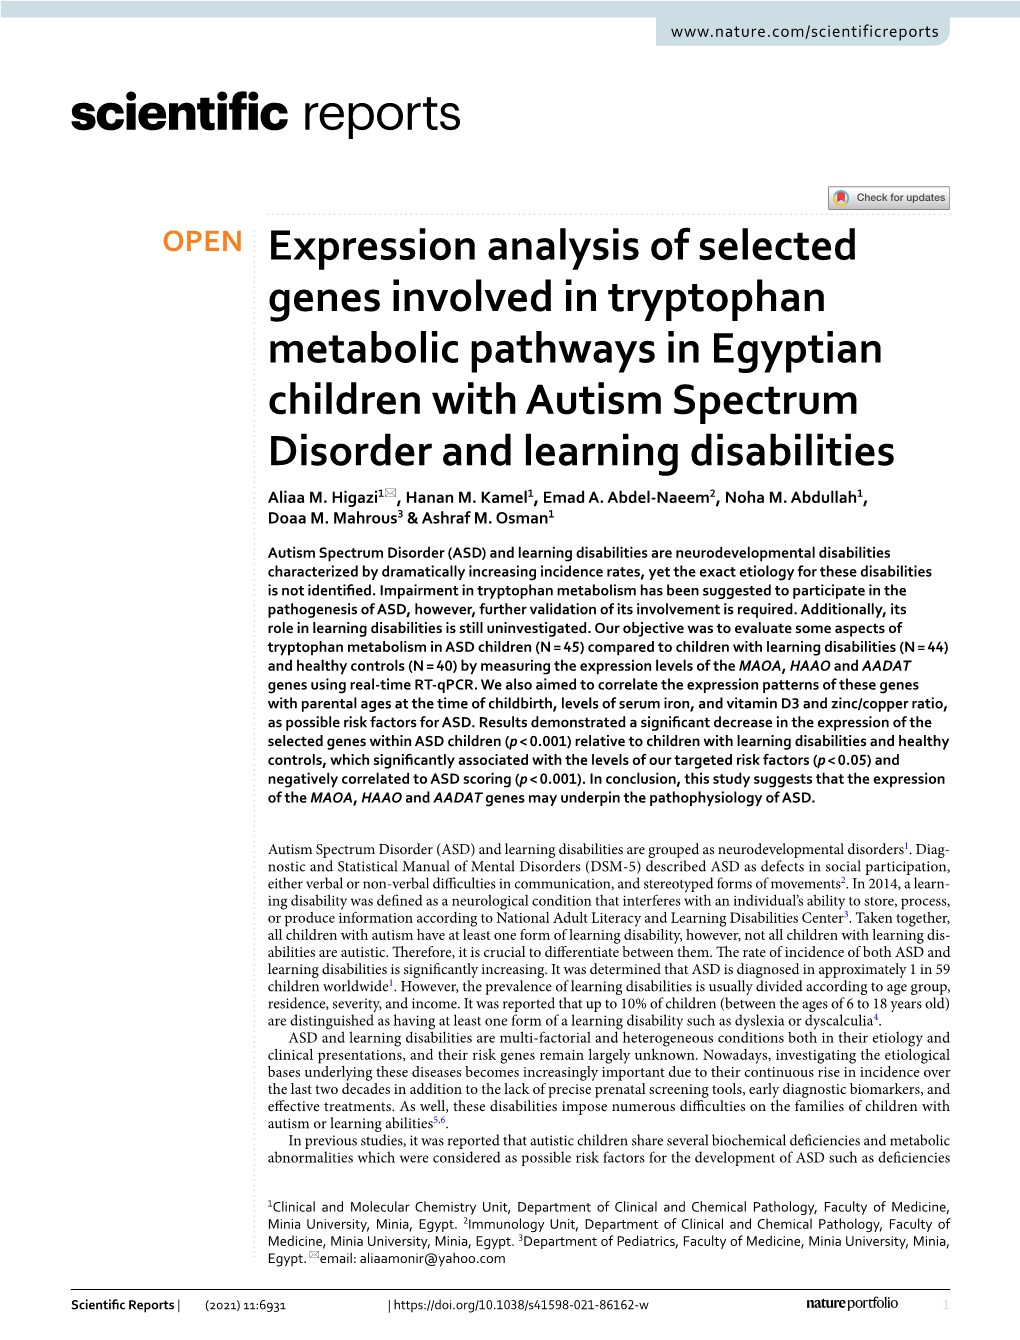 Expression Analysis of Selected Genes Involved in Tryptophan Metabolic Pathways in Egyptian Children with Autism Spectrum Disorder and Learning Disabilities Aliaa M